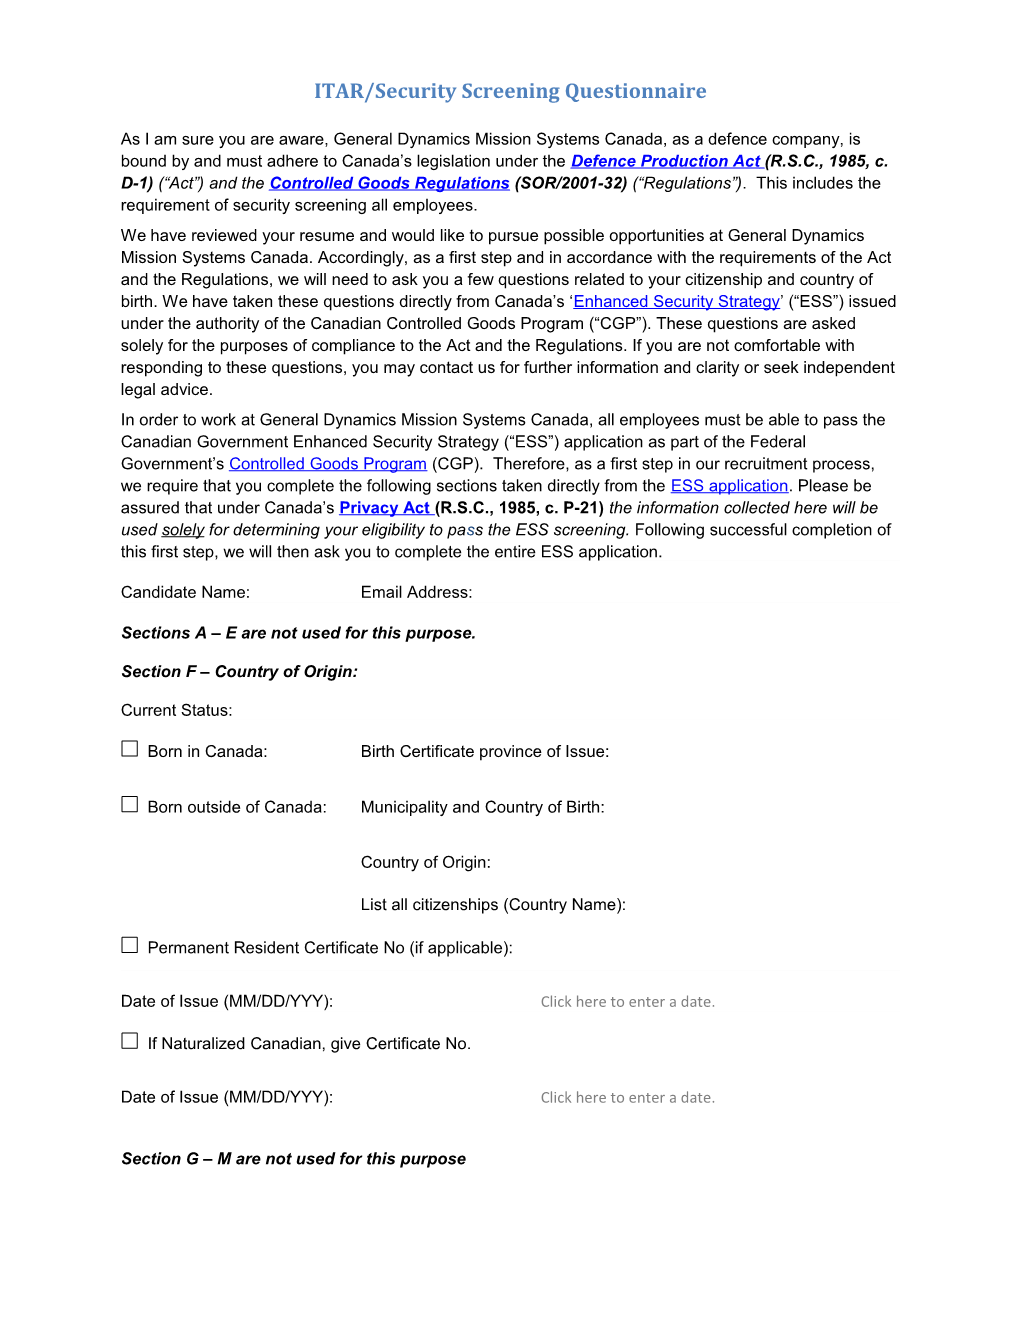 ITAR/Security Screening Questionnaire